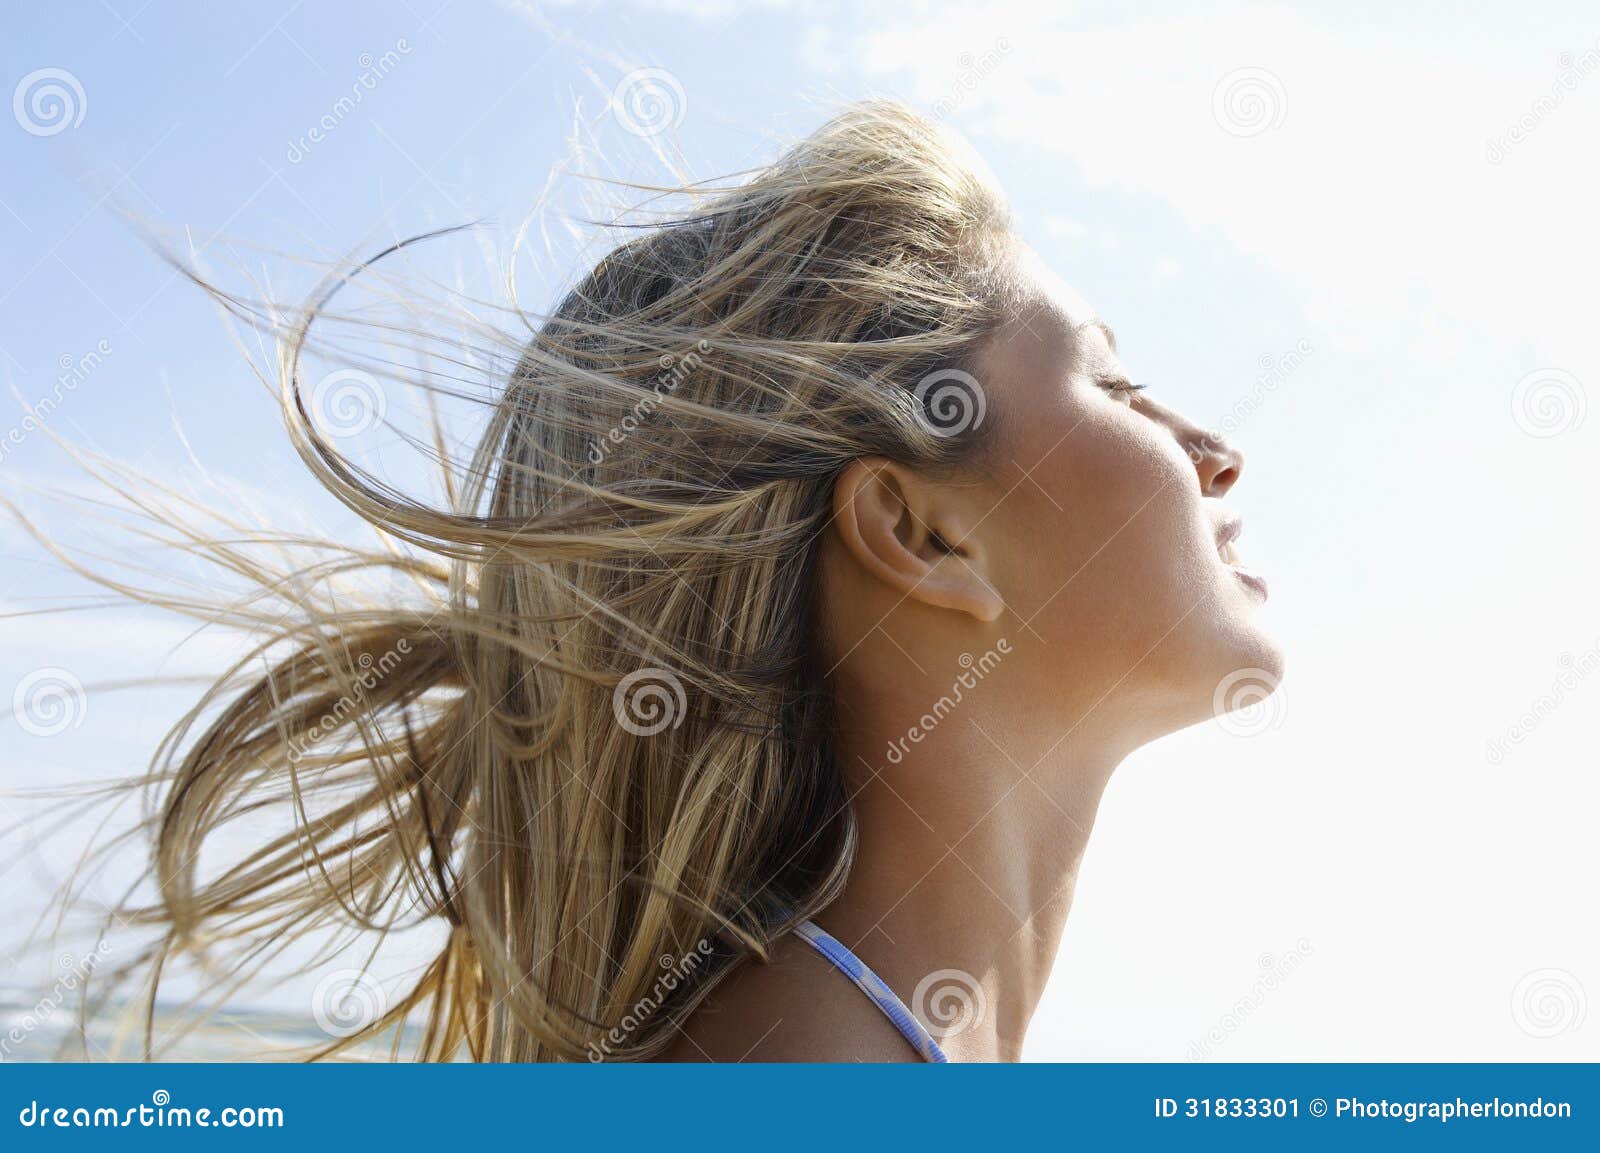 young woman with eyes closed enjoying sunlight